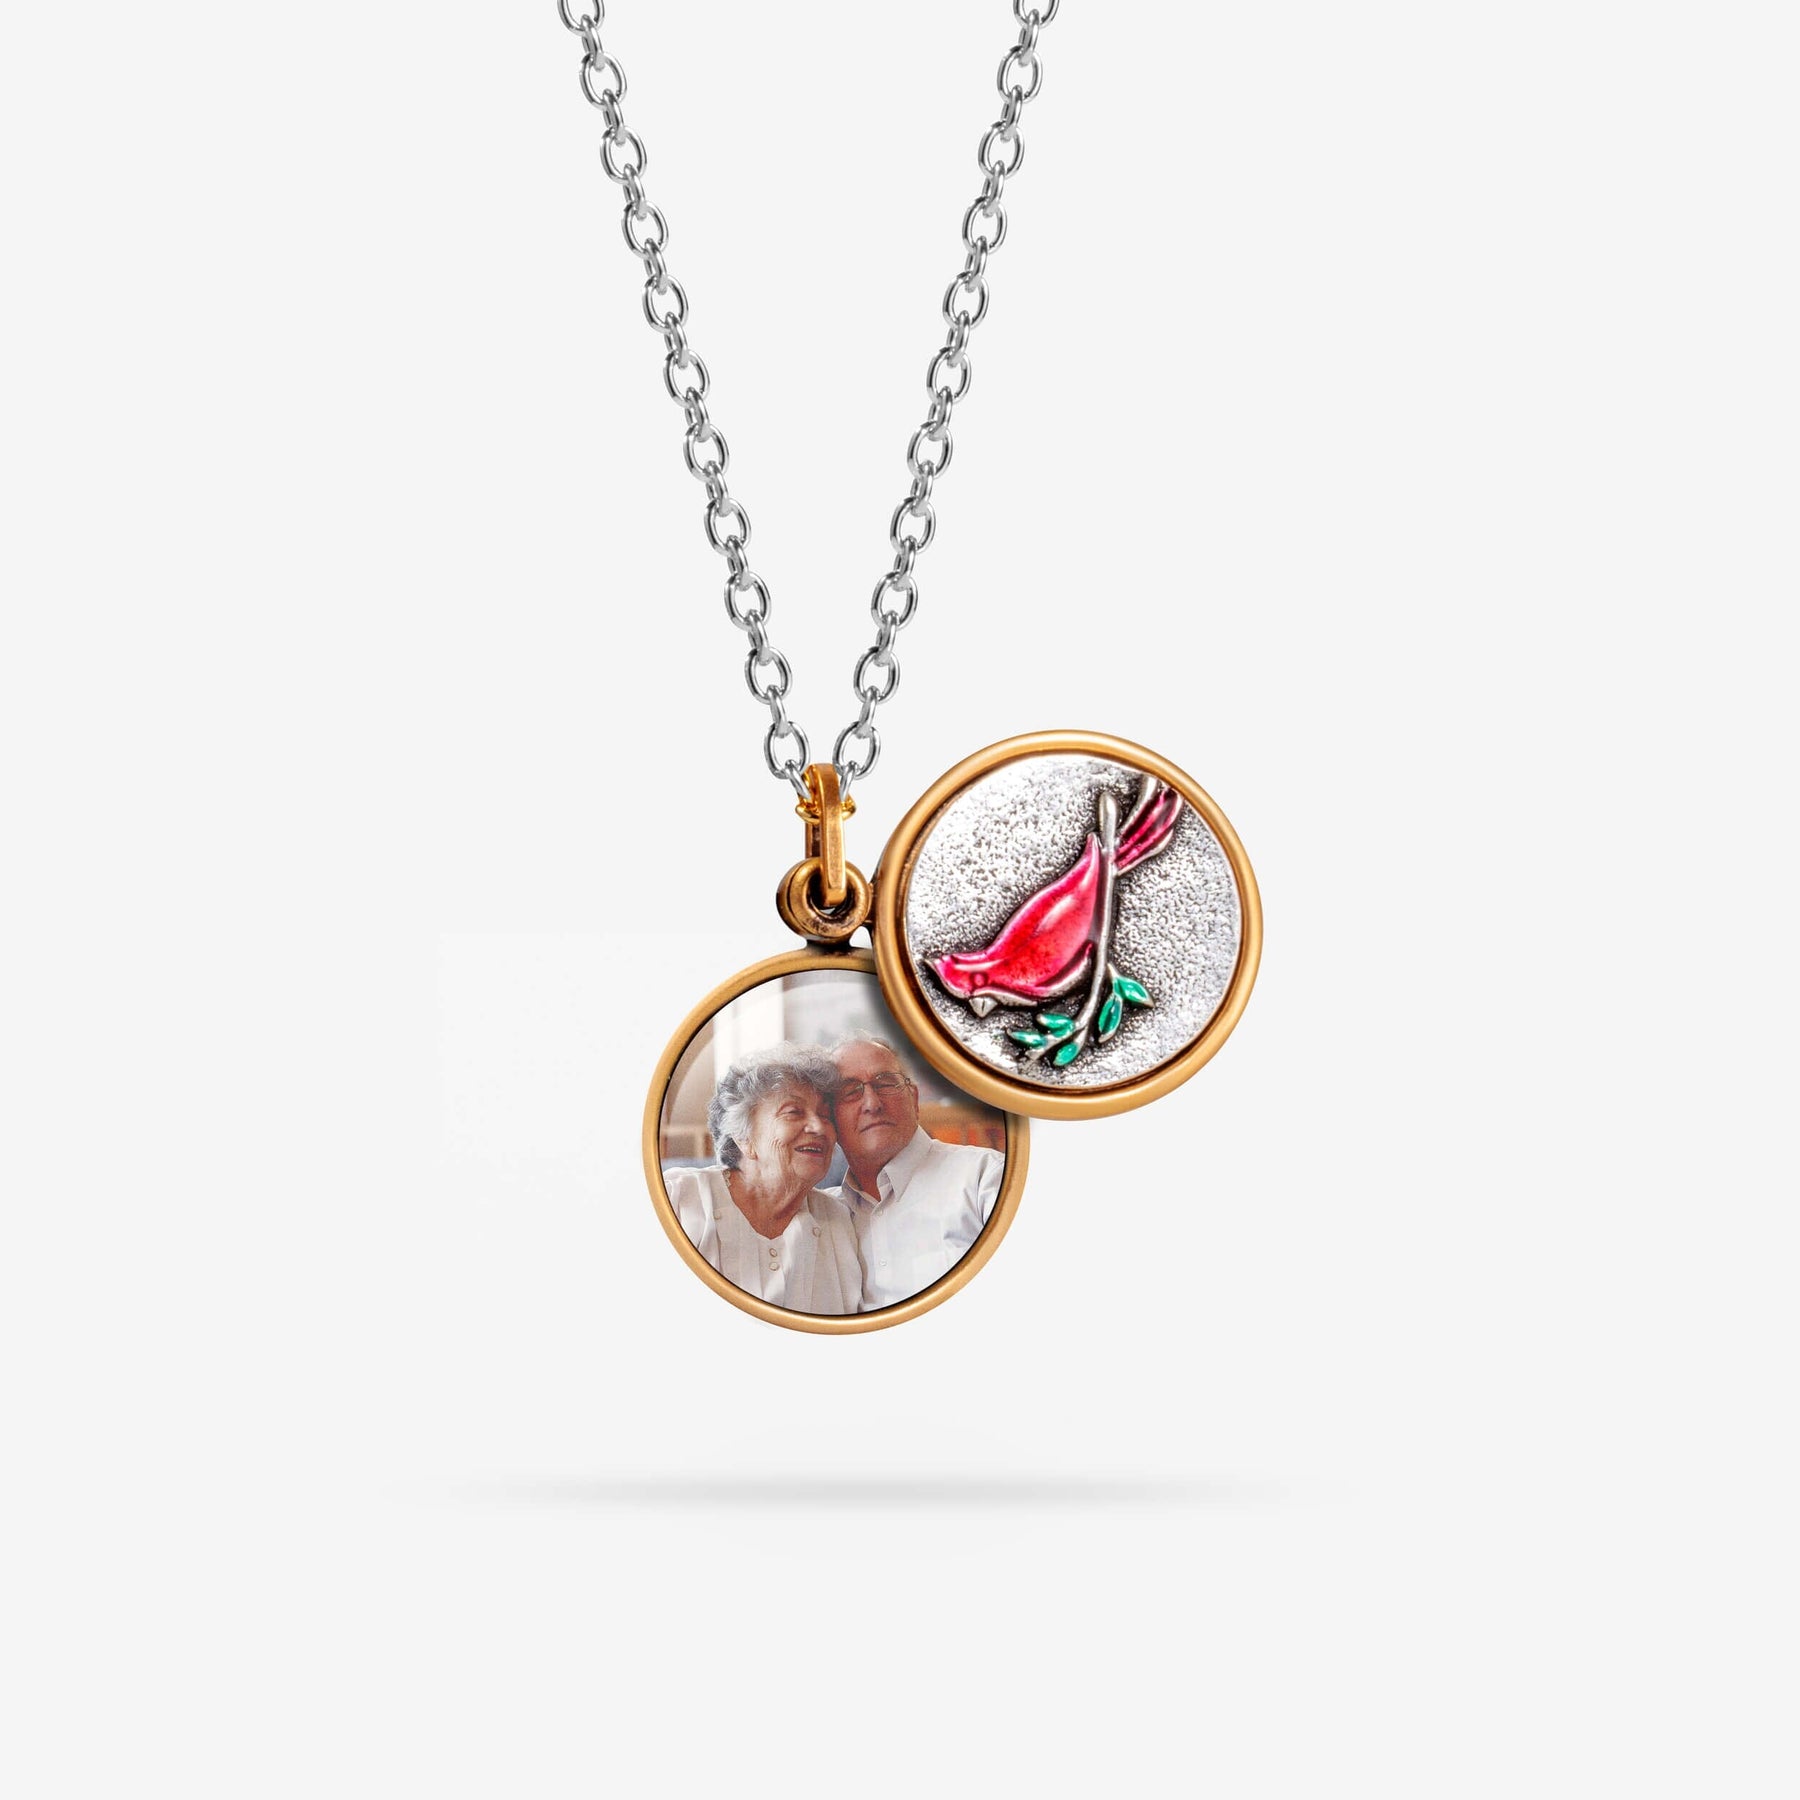 Personalized Locket Necklace